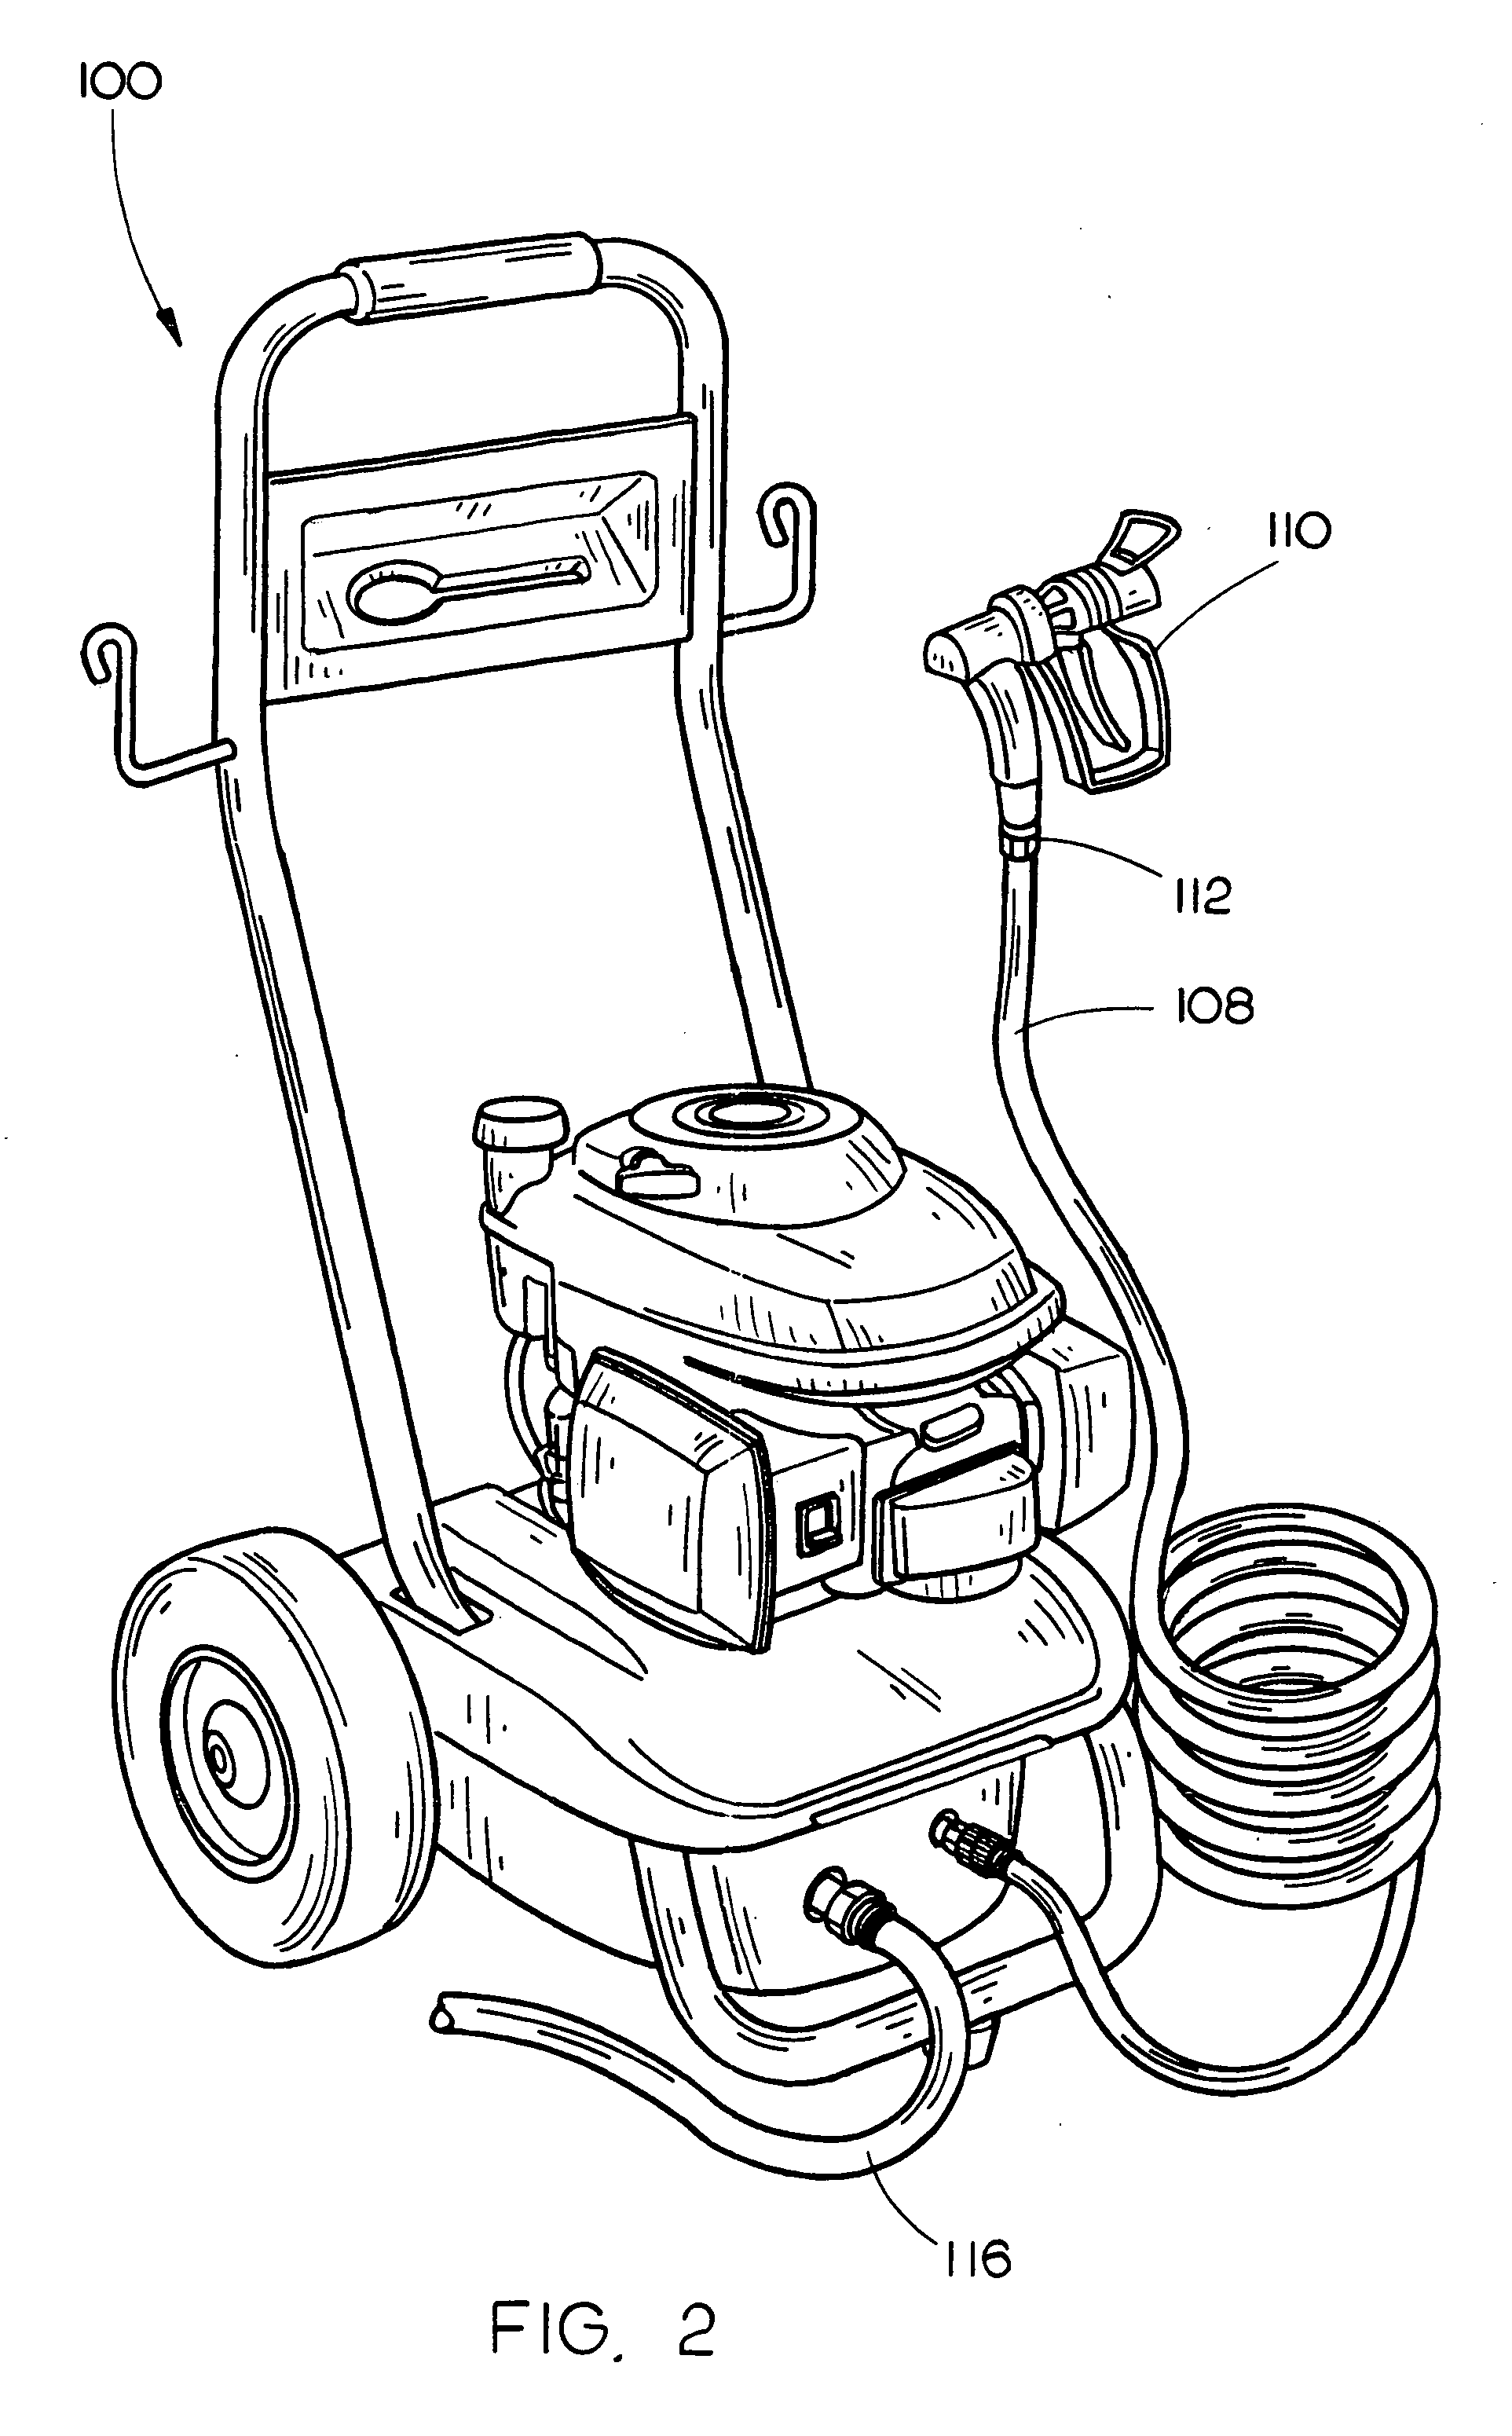 Paint sprayer and pressure washer assembly